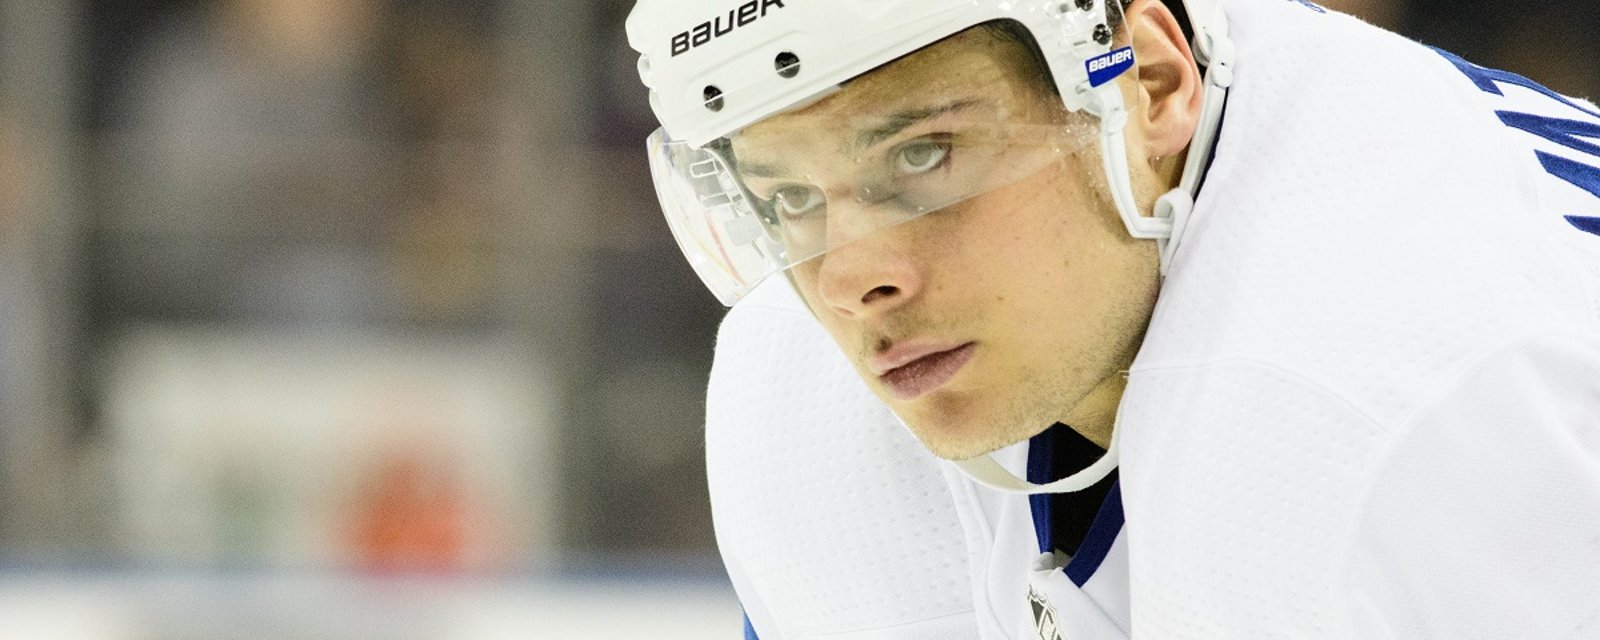 Unique demands from Auston Matthews may complicate contract negotiations.